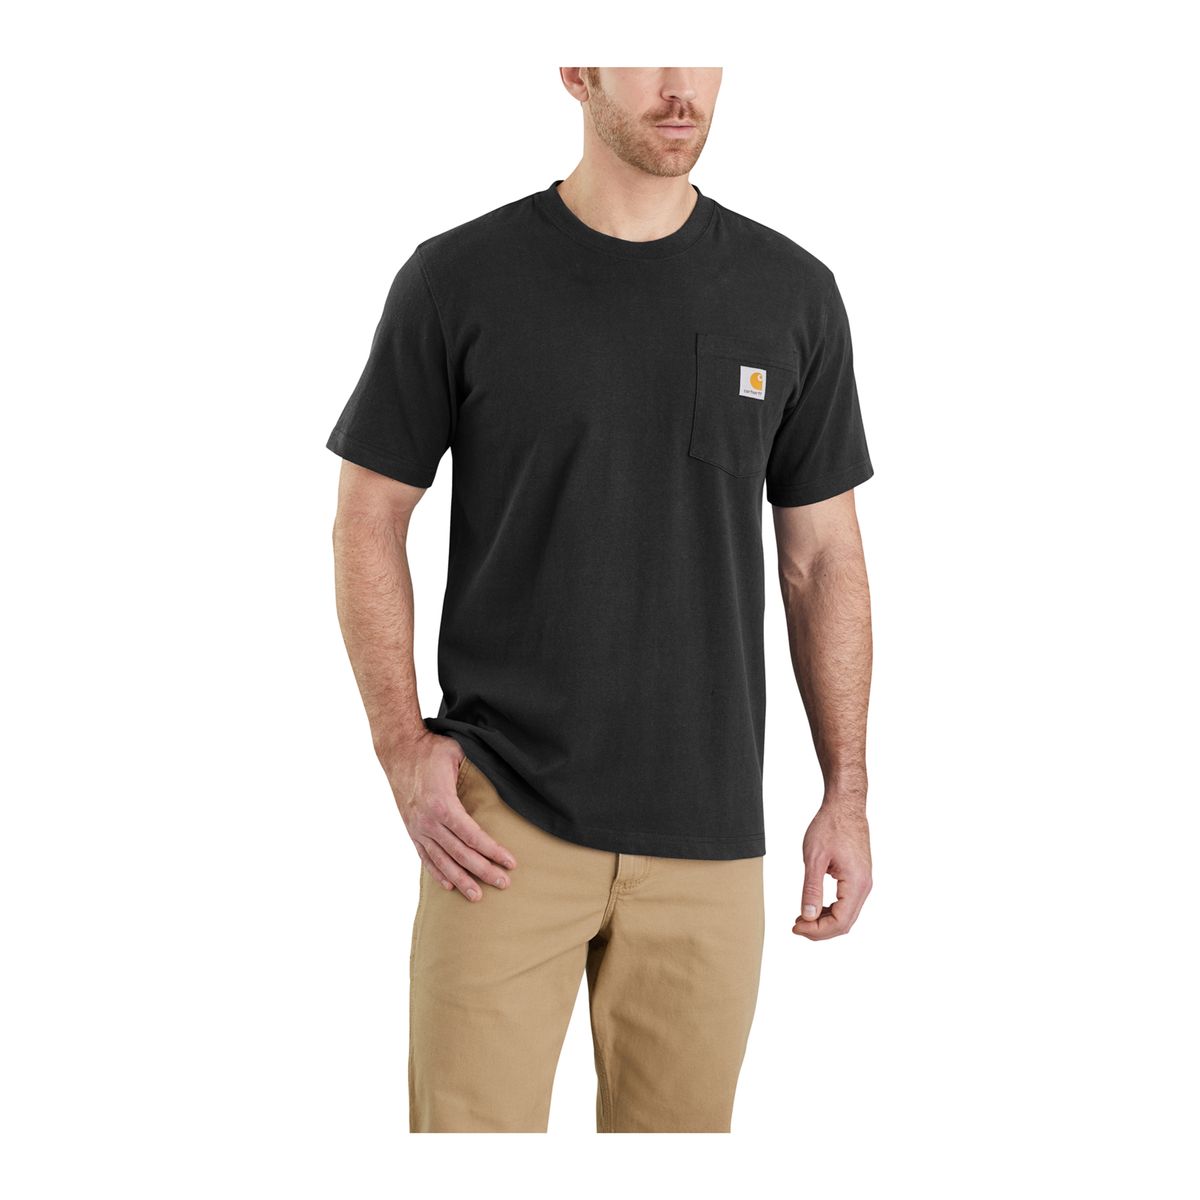 Men's Relaxed Fit Heavyweight s/s Pocket T-shirt